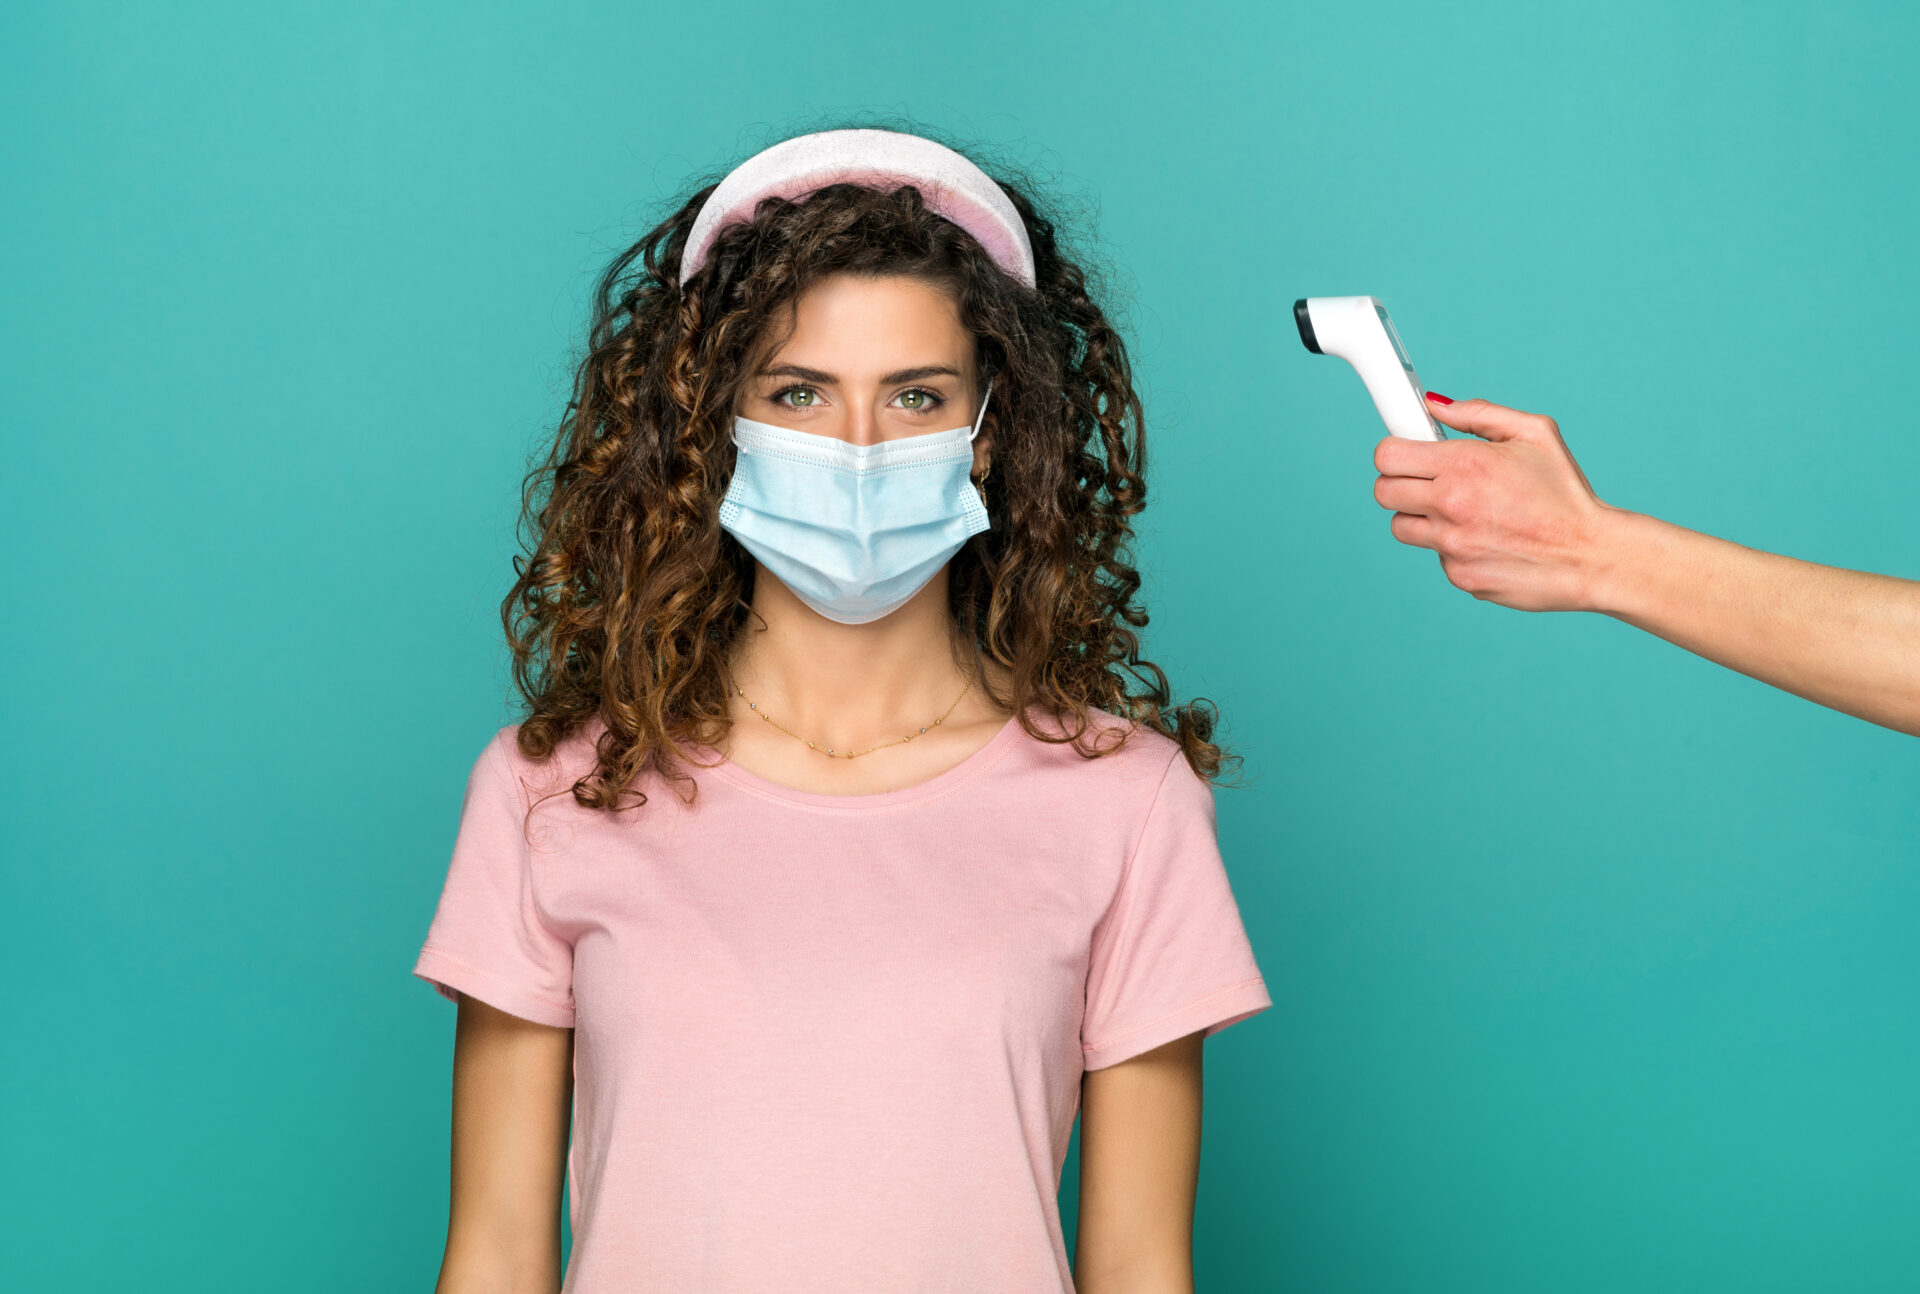 Young woman in protective face mask during the Covid-19 or coronavirus pandemic having her temperature monitored on a digital thermometer over a blue studio background